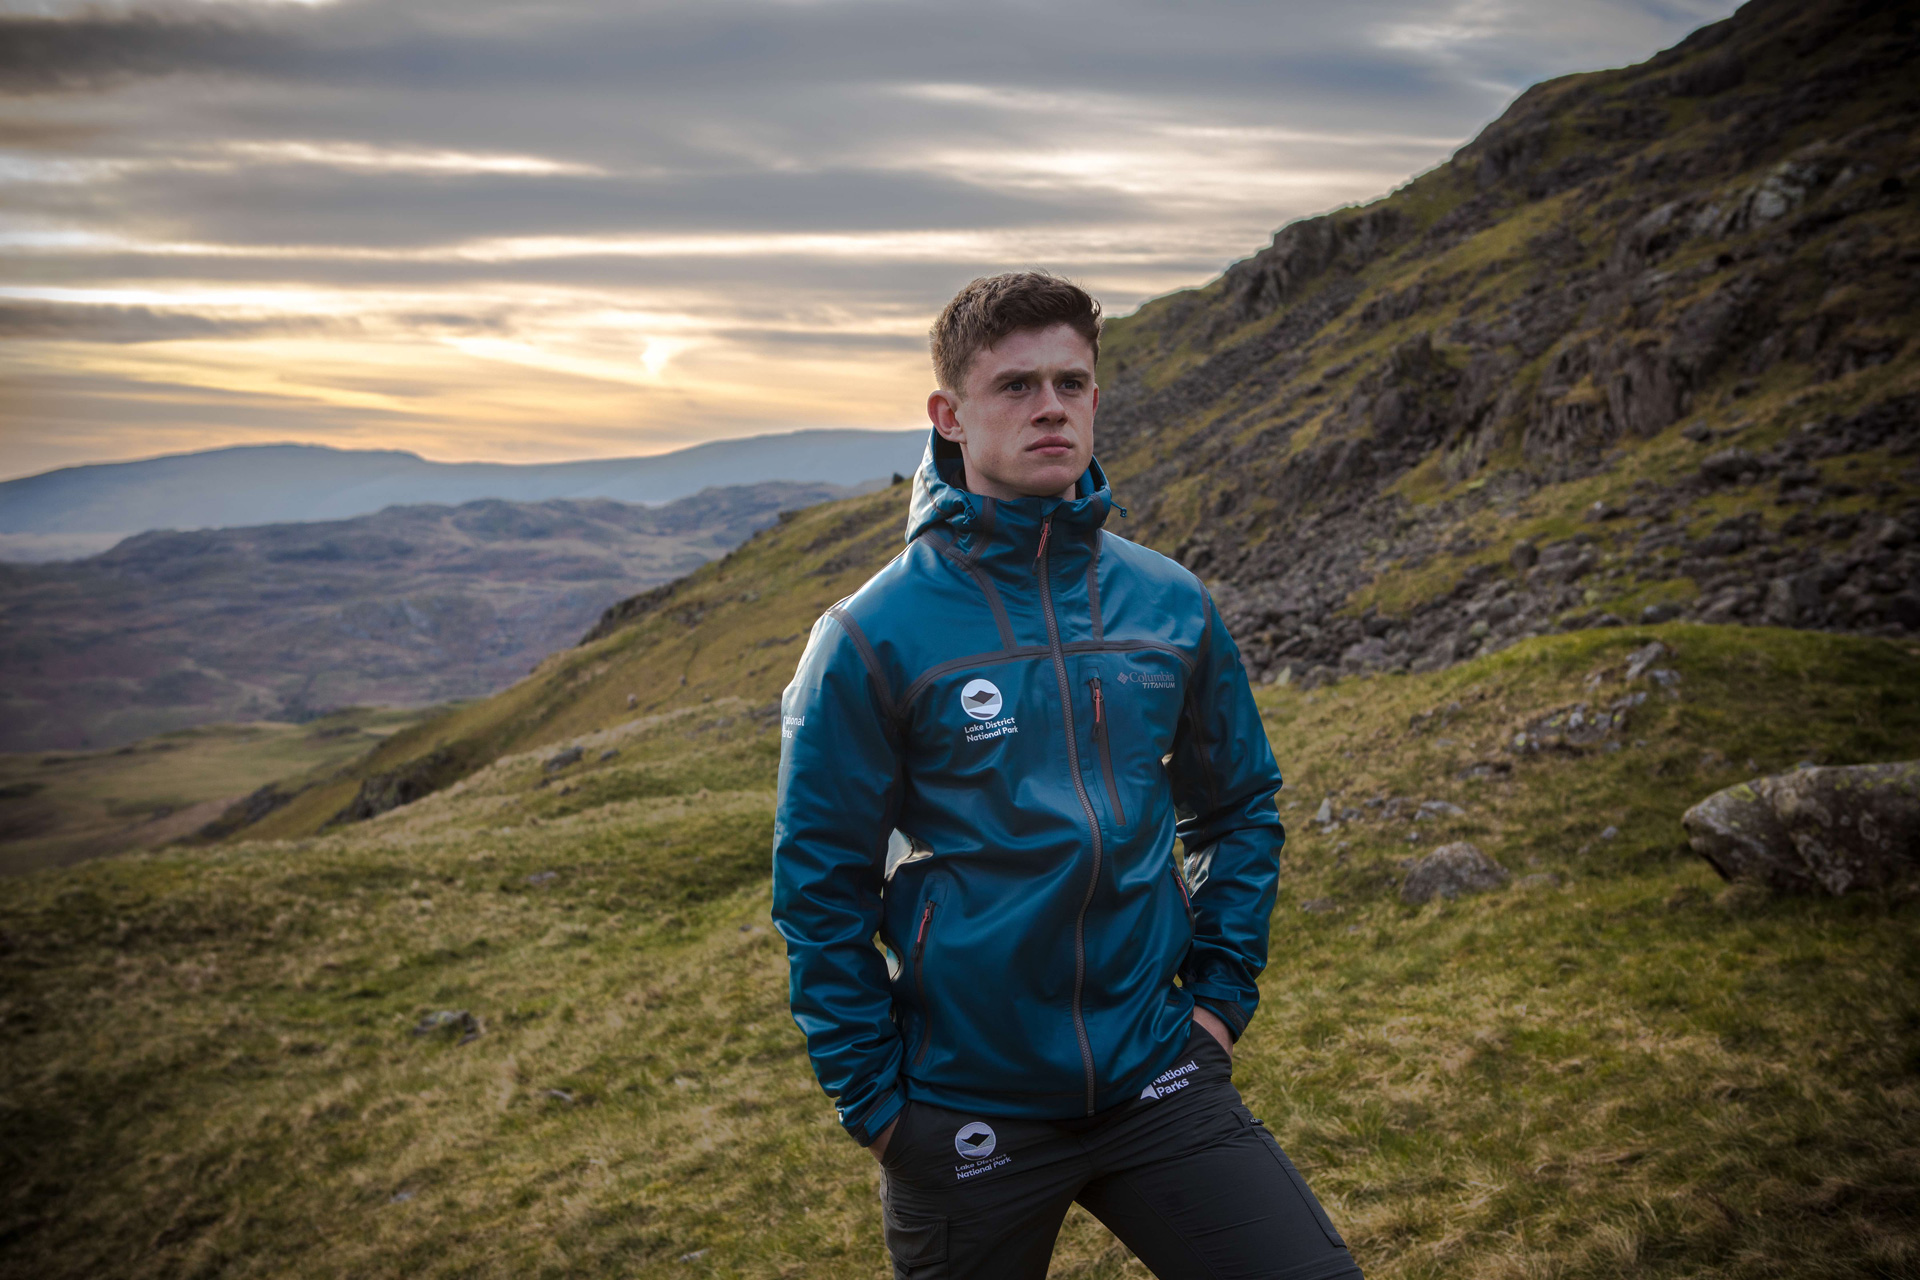 columbia-sportswear-launches-partnership-with-uks-national-parks